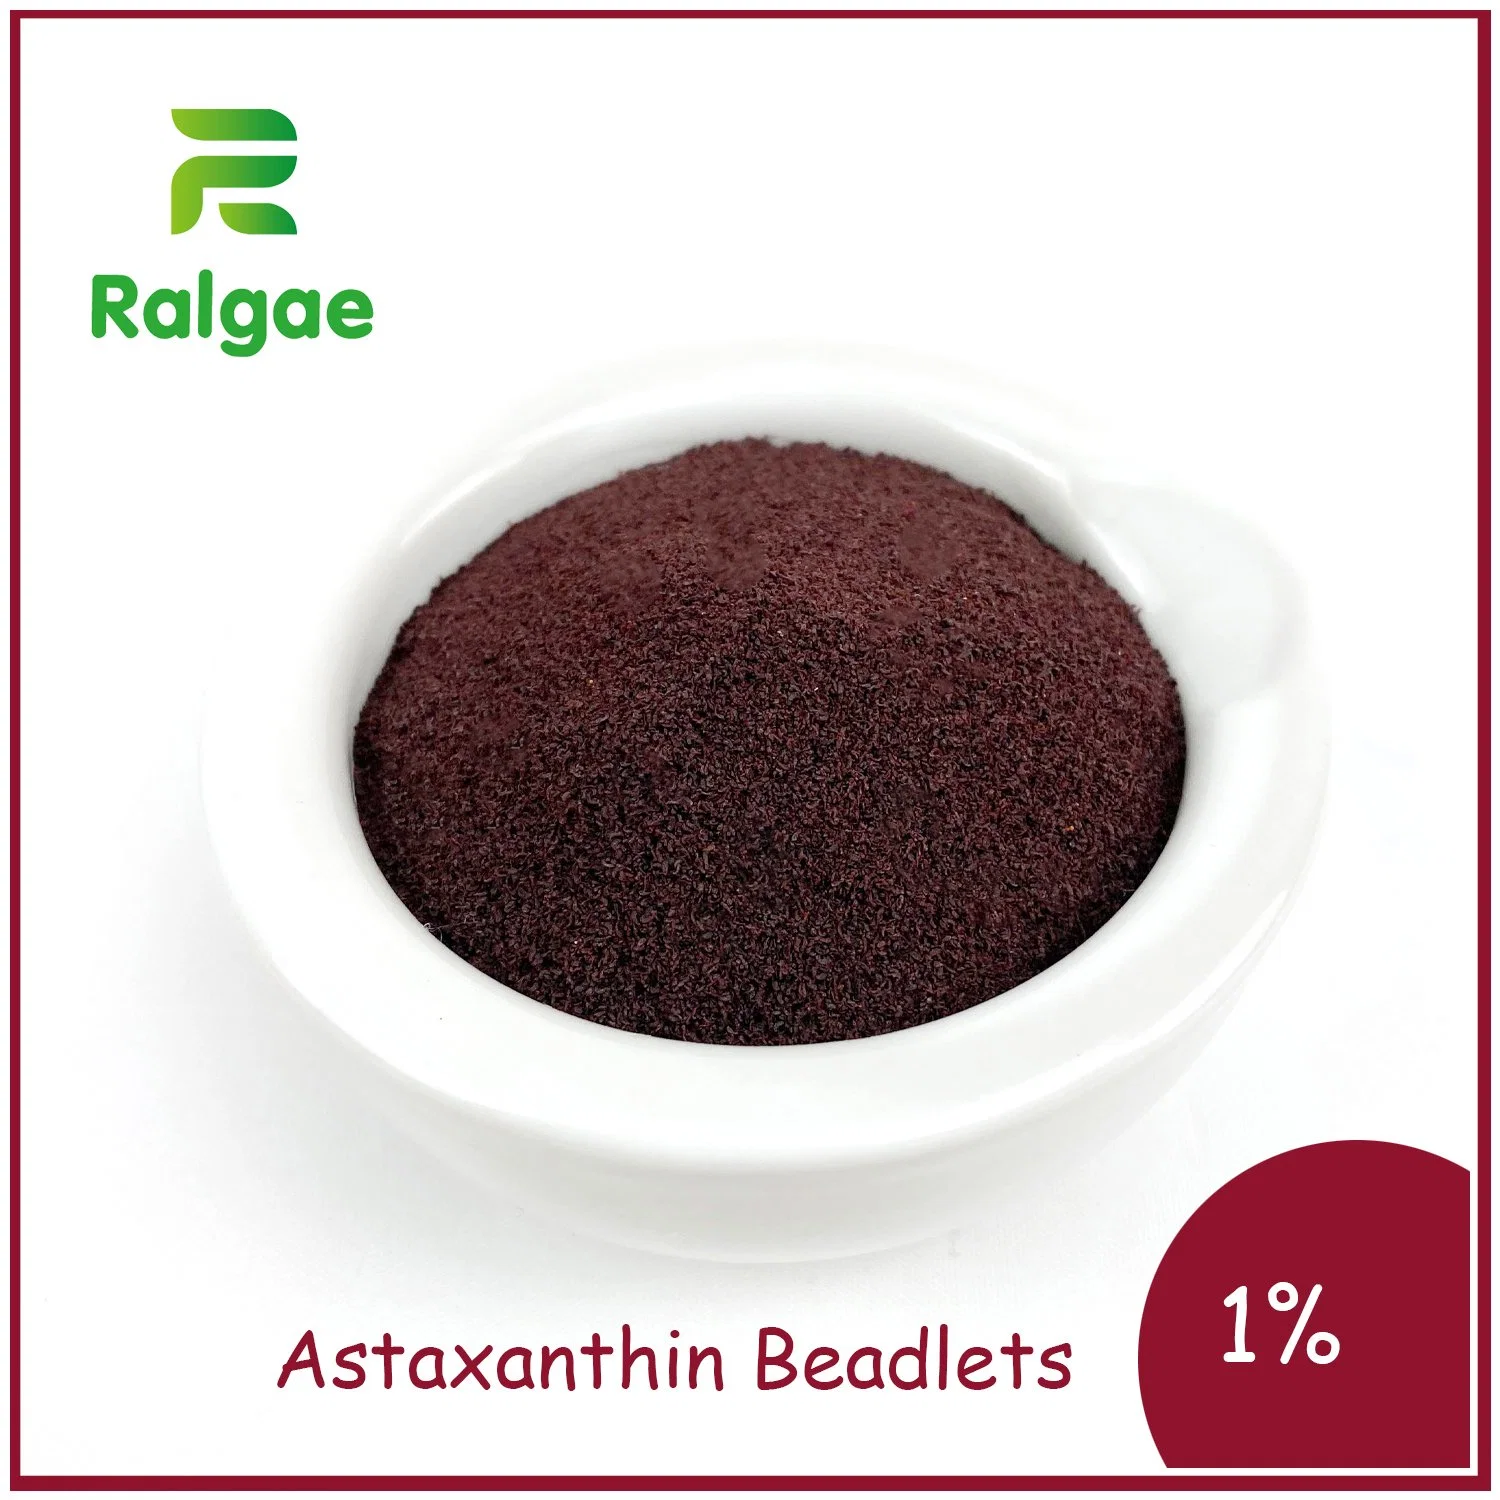 Astaxanthin Beadlets 1% Cold Water Soluble Antioxidant Health Nutrition Material